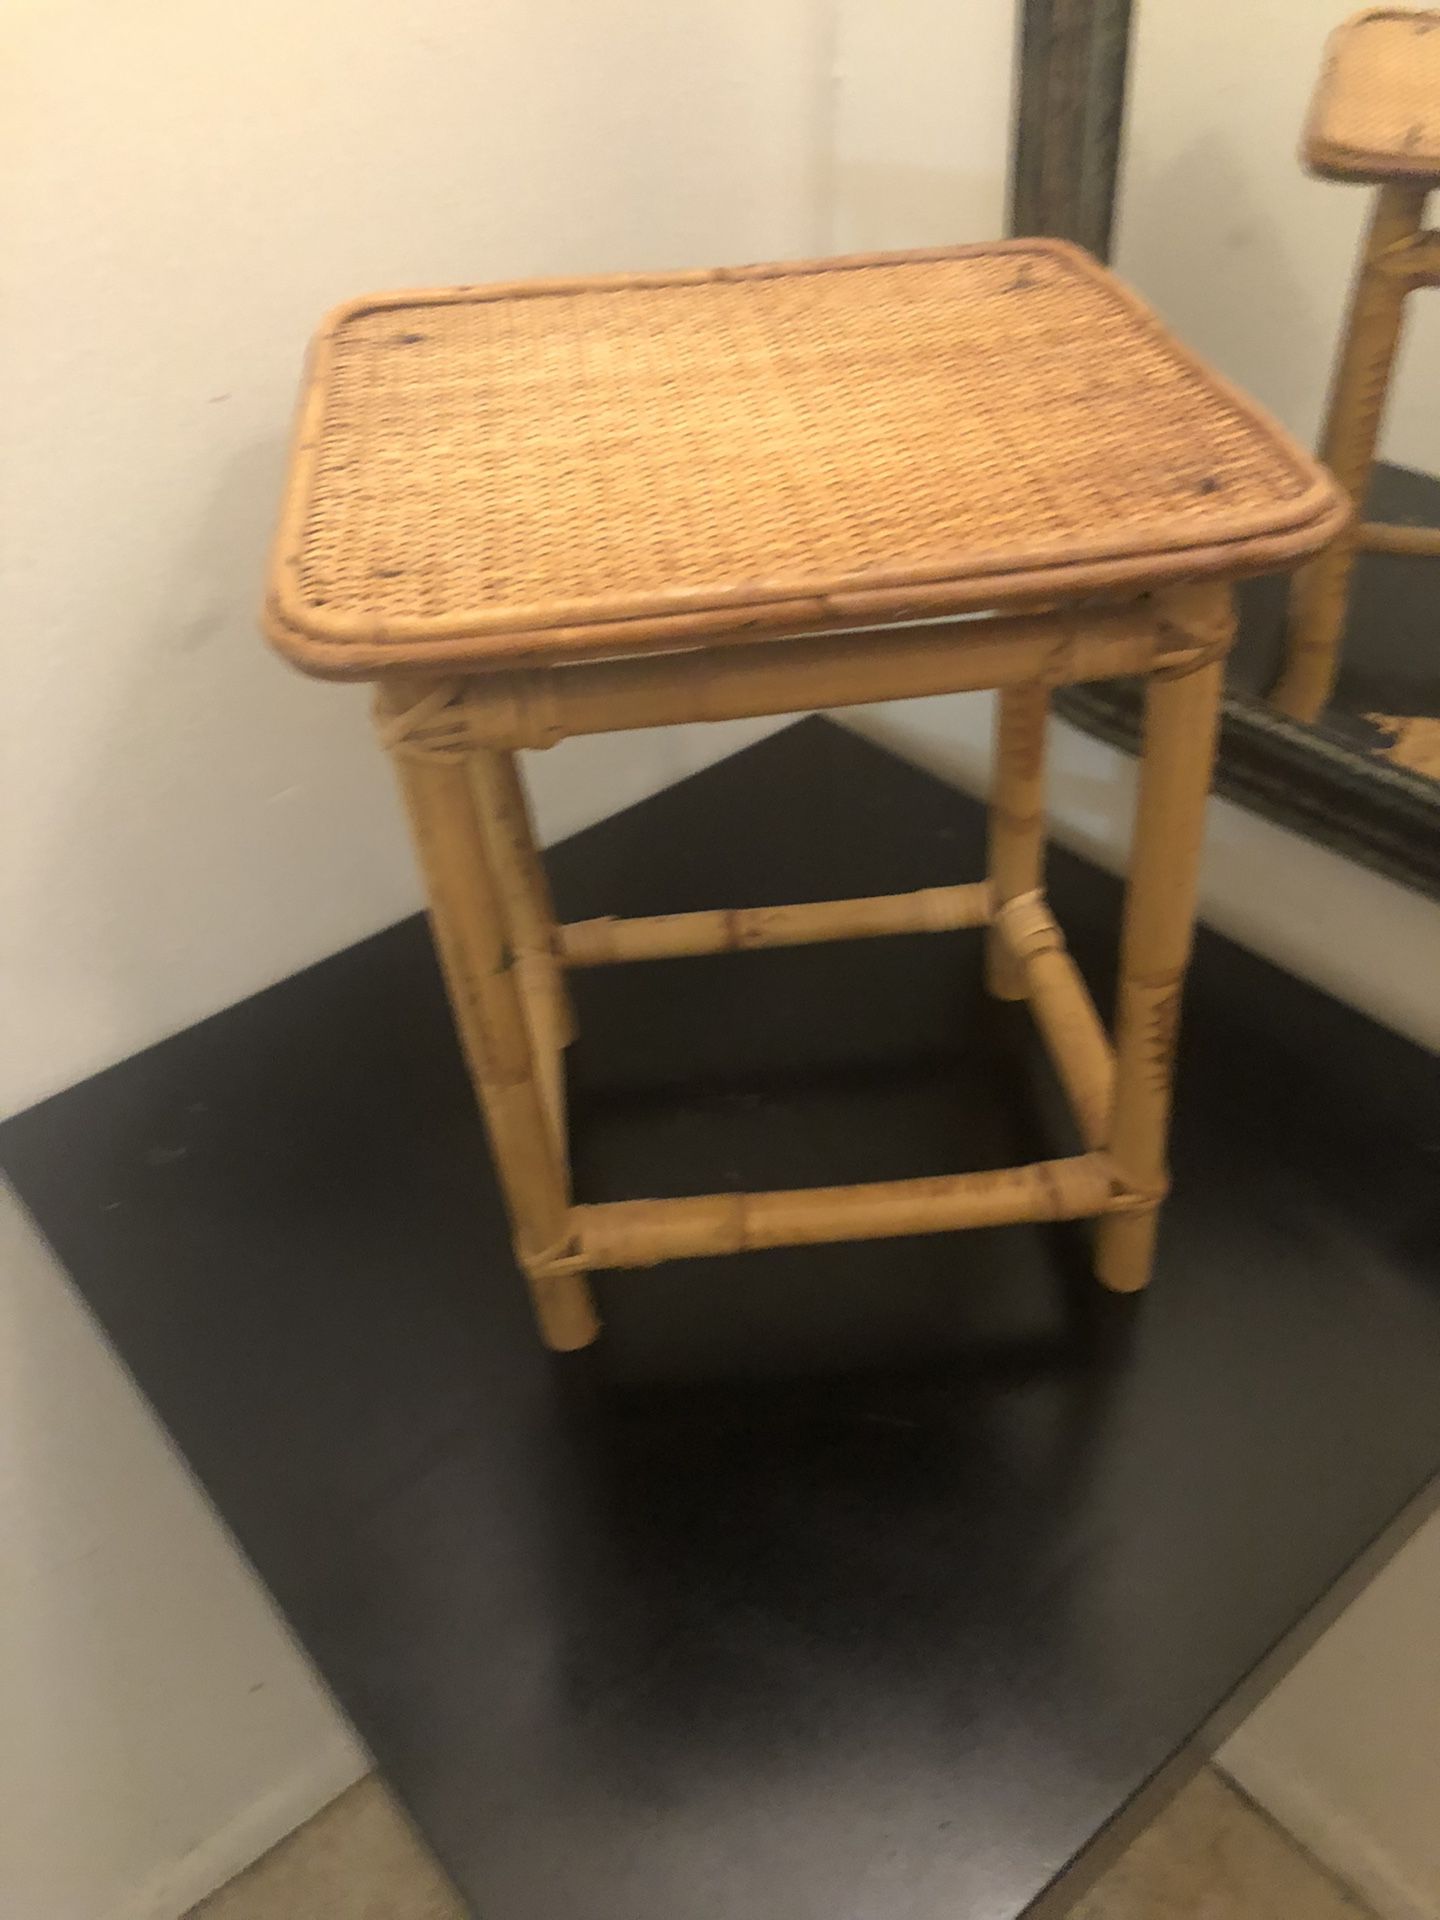 Bamboo small stool or side table